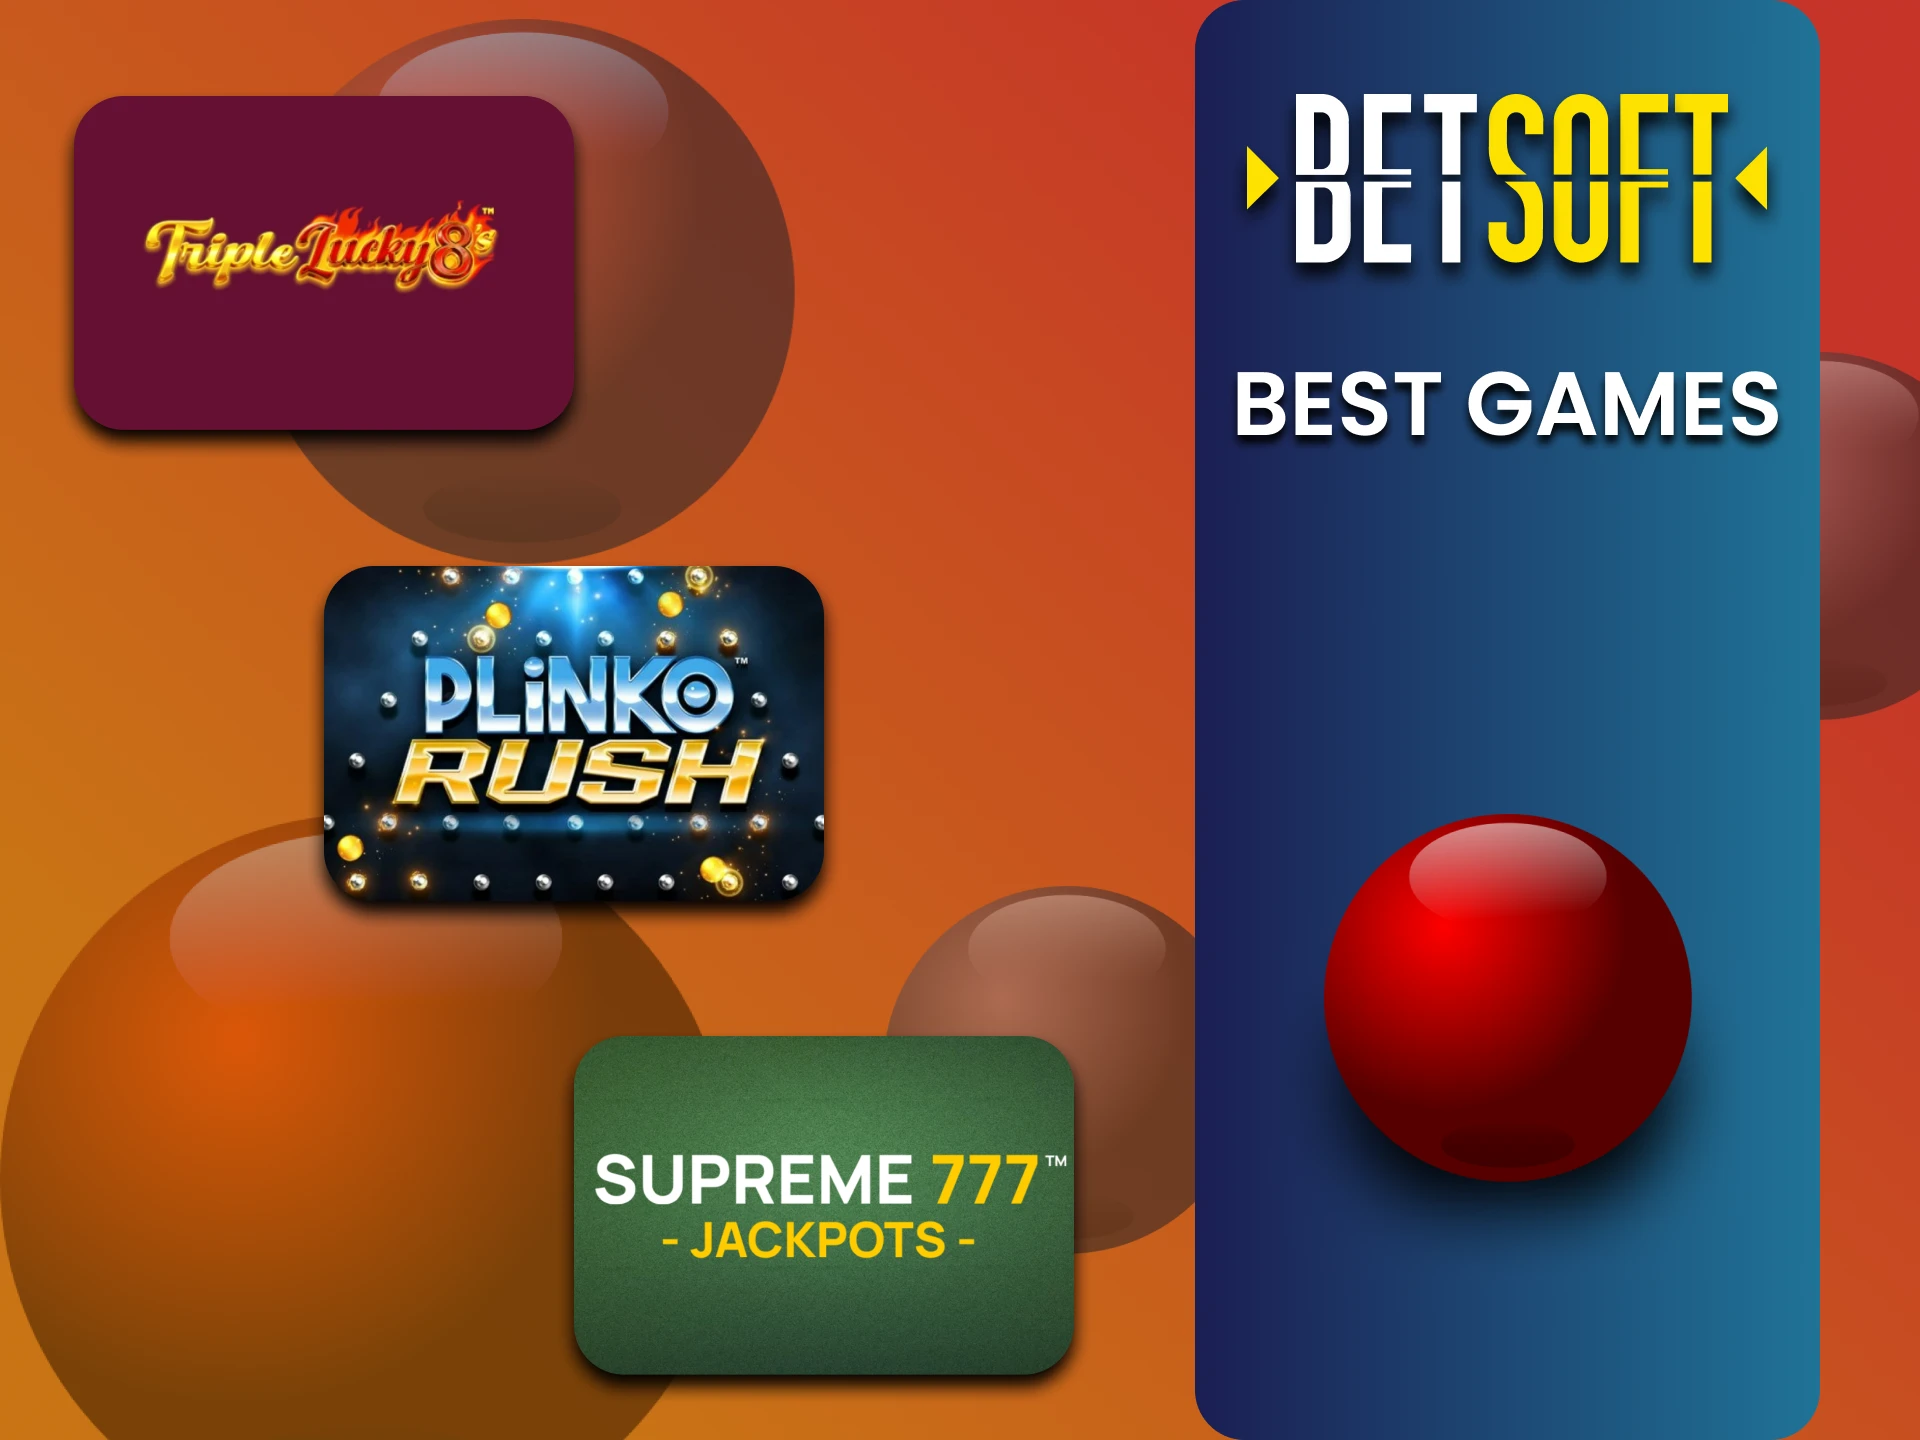 Choose the best games from Betsoft.